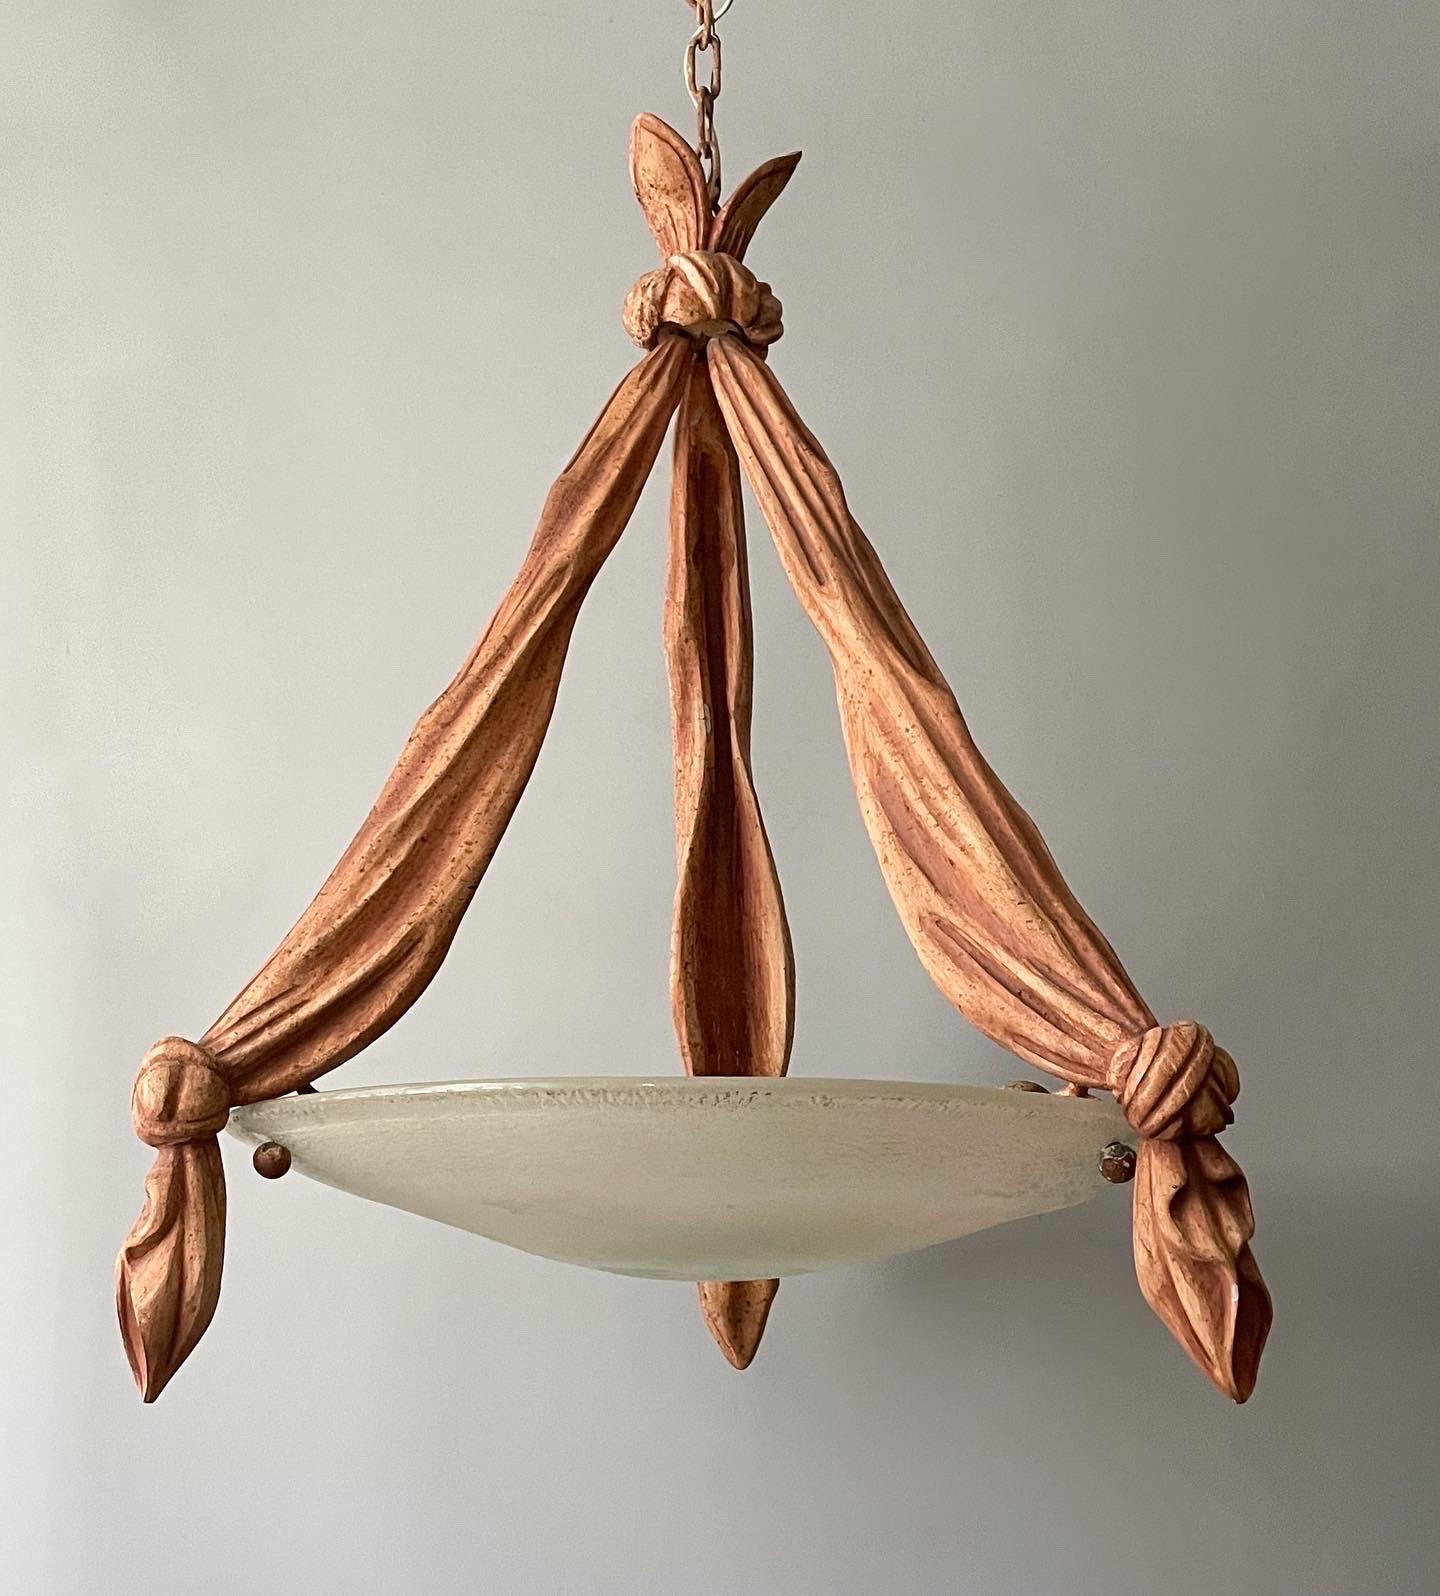 Fantastic, Italian vintage chandelier in the Hollywood Regency manner.

The chandelier features carved and painted wood supports simulating three draped scarves suspending a Murano glass shade executed in the scavo-corroso technique. 

The